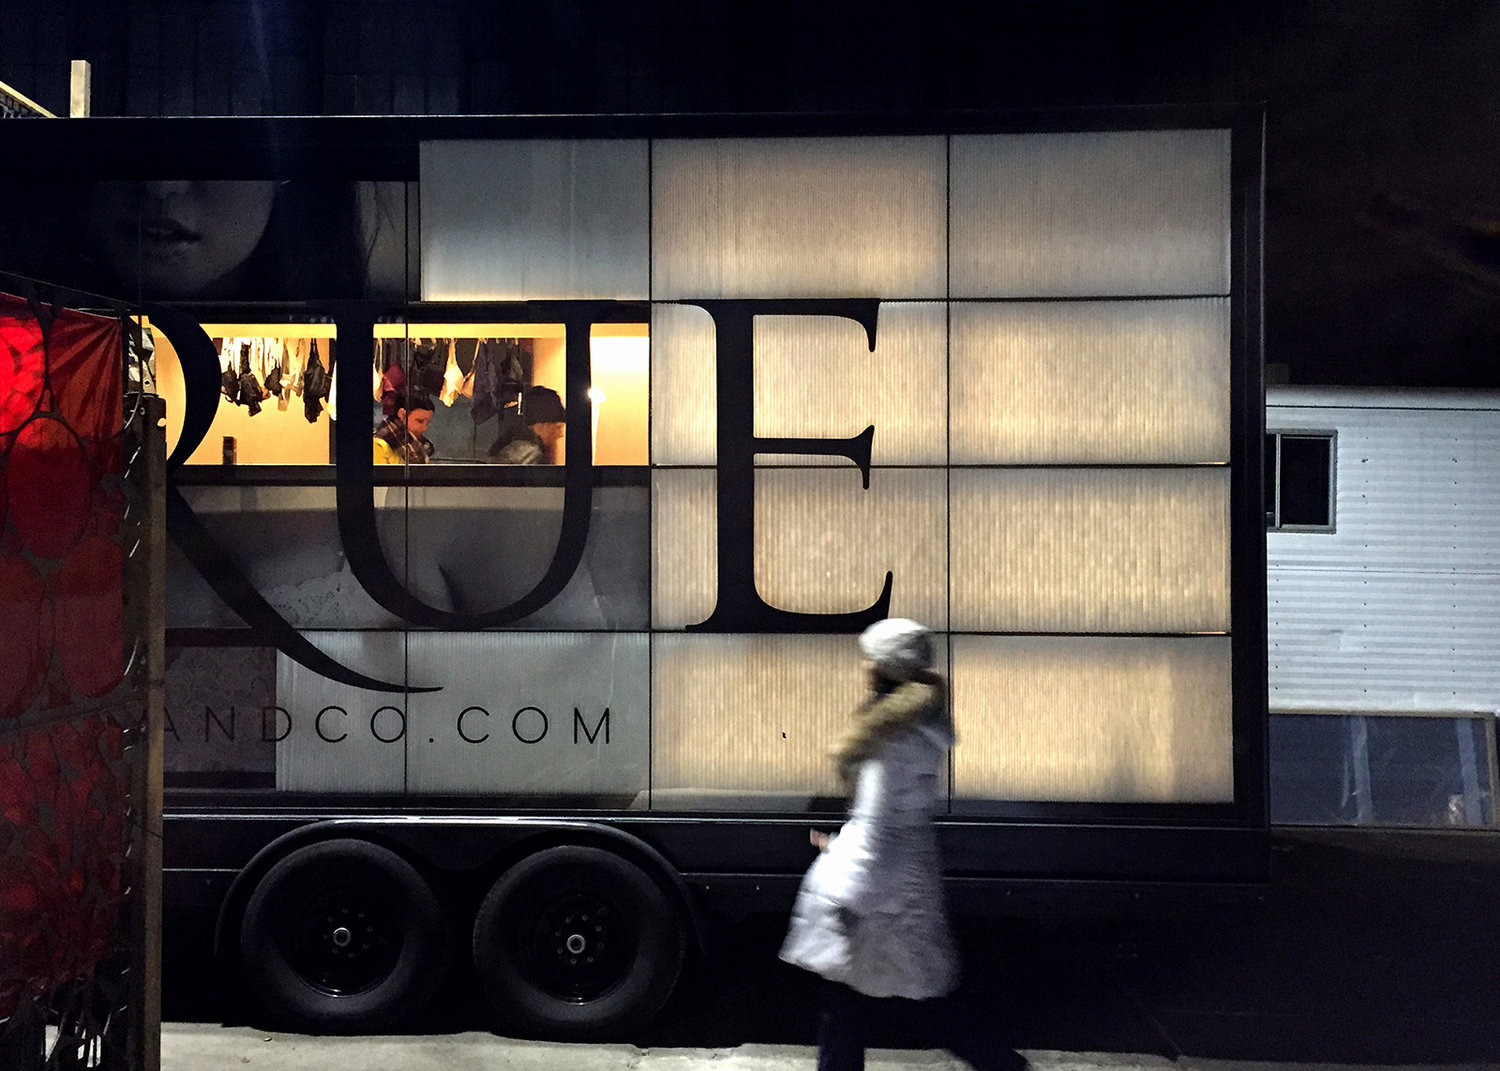 True cos. True & co. Mobile lingerie shop by saw and MOA will Travel across the us.